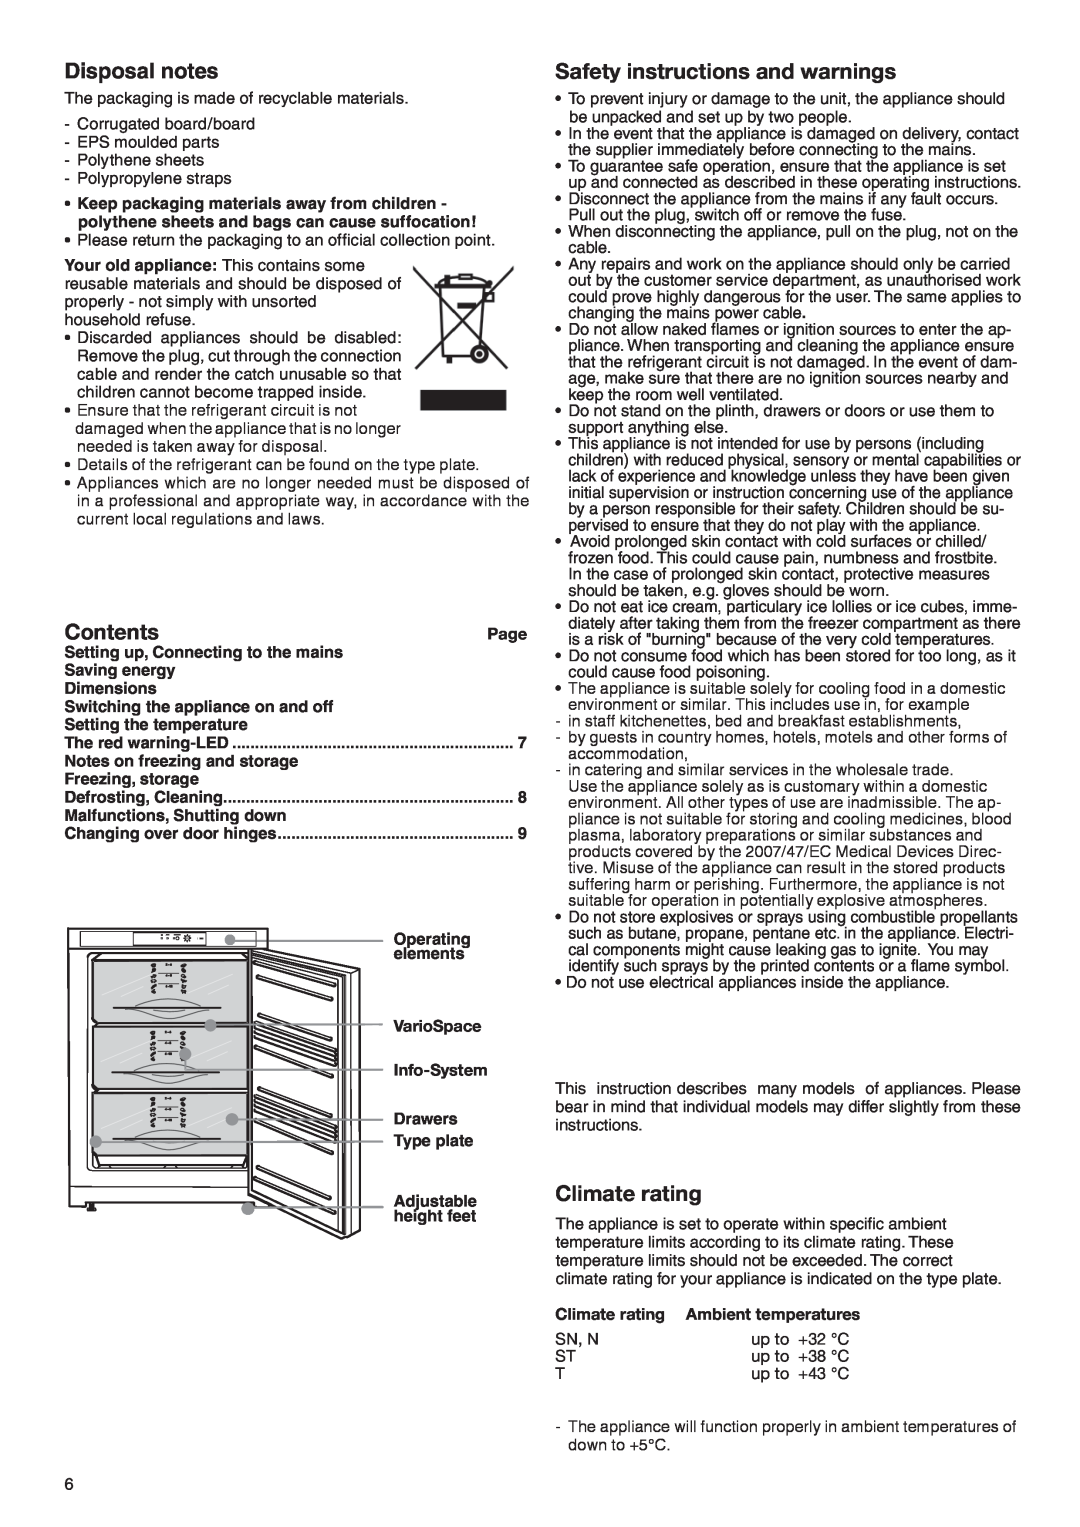 Liebherr 7080 904-00 manual Disposal notes, Contents, Safety instructions and warnings, Climate rating, Drawers 